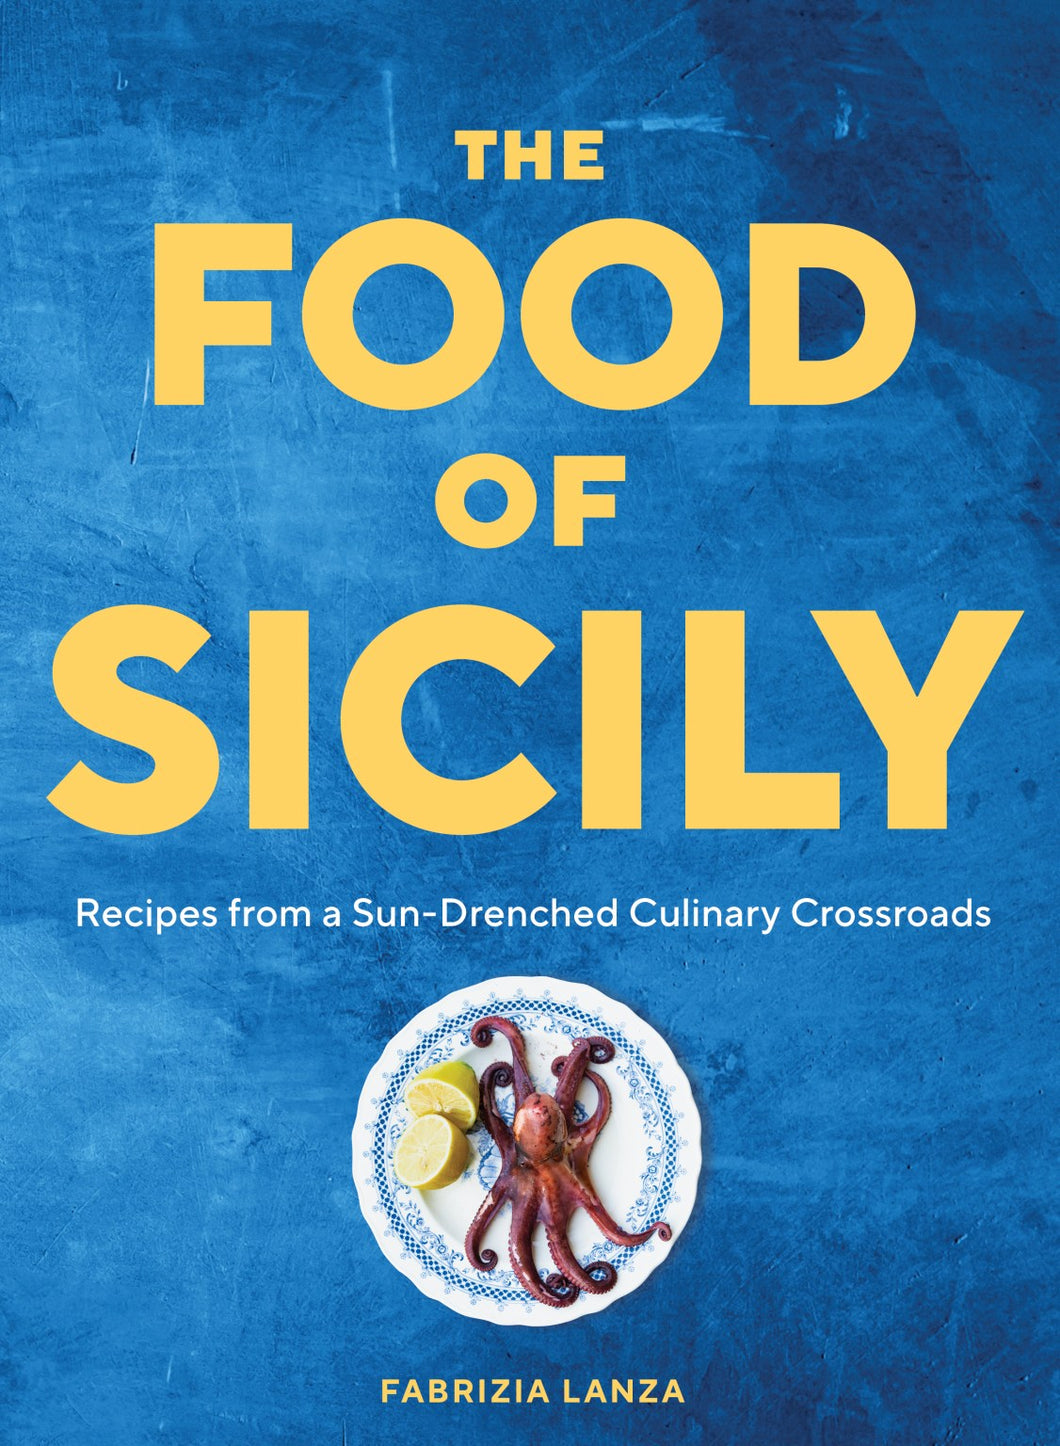 The Food of Sicily Recipes from a Sun Drenched Culinary Crossroads by Fabrizia Lanza